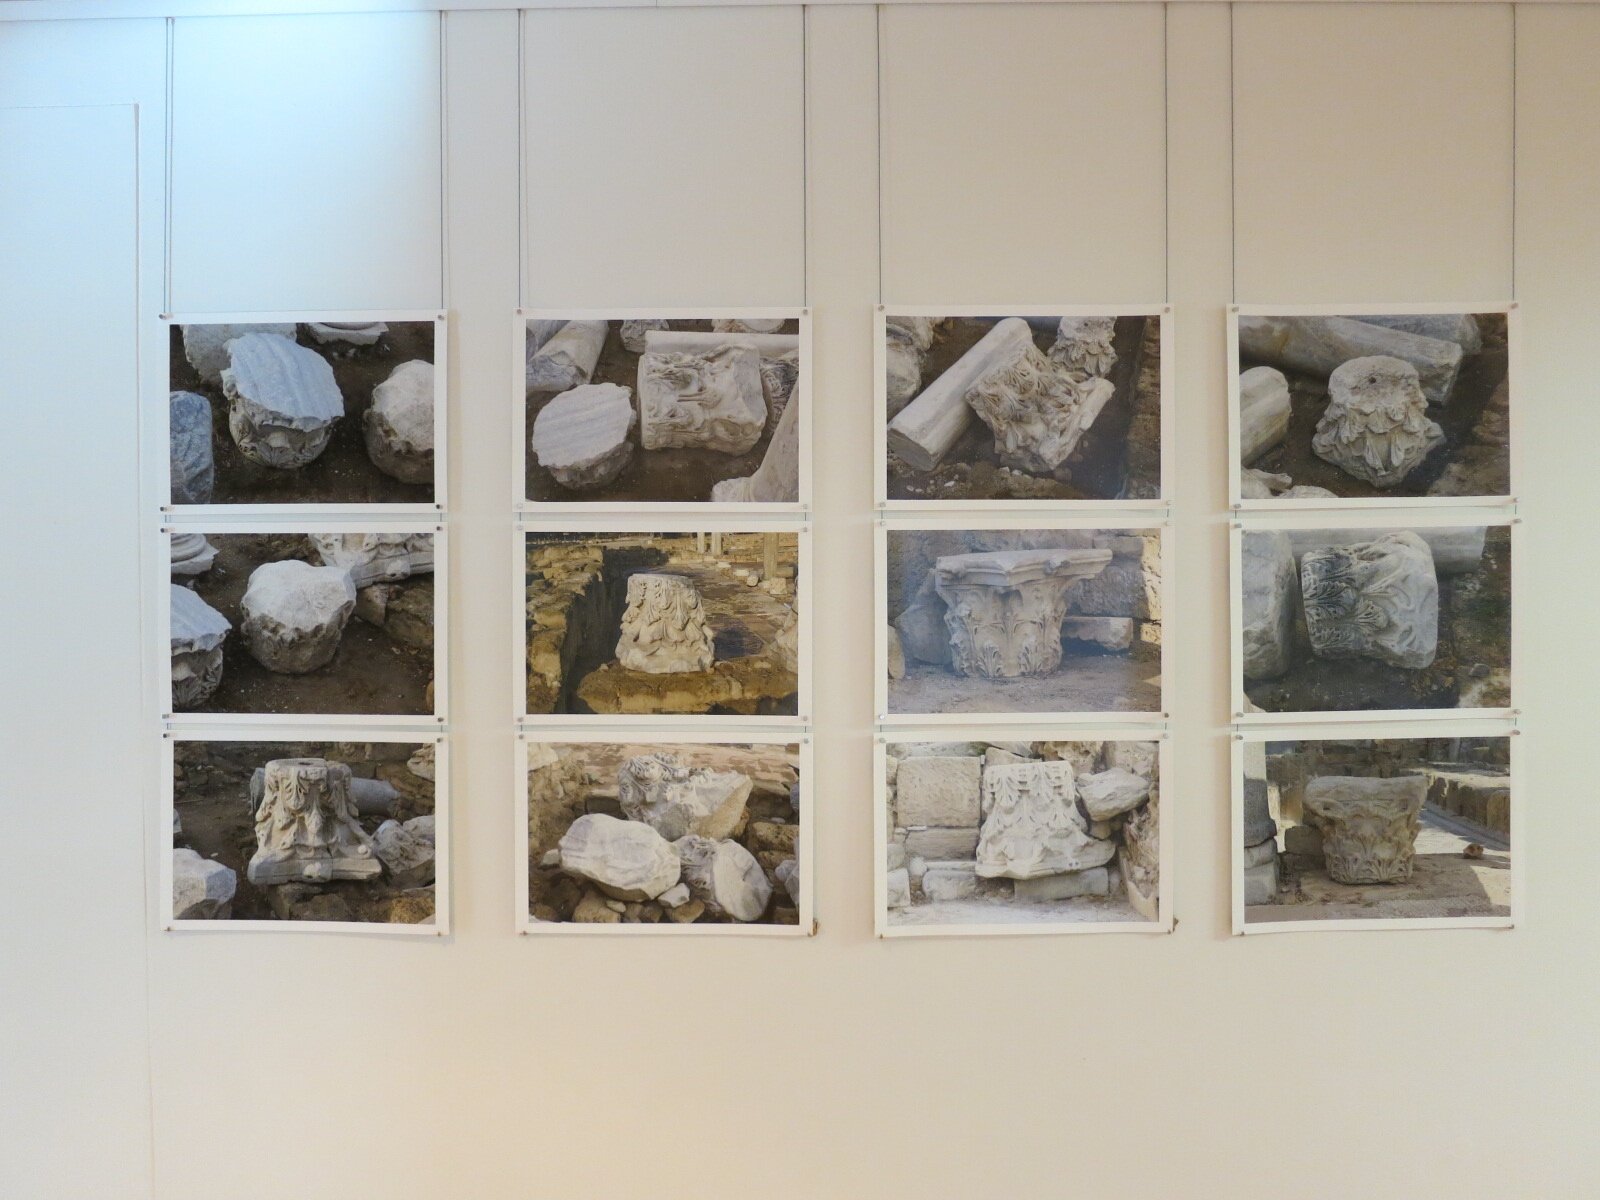  Installation view of works by  Derek Kreckler  from the exhibition  Response to Cyprus,  10 July 2013. The event was hosted by the Australian Archaeological Institute at Athens (AAIA) at the Centre of Classical and Near Eastern Studies of Australia 